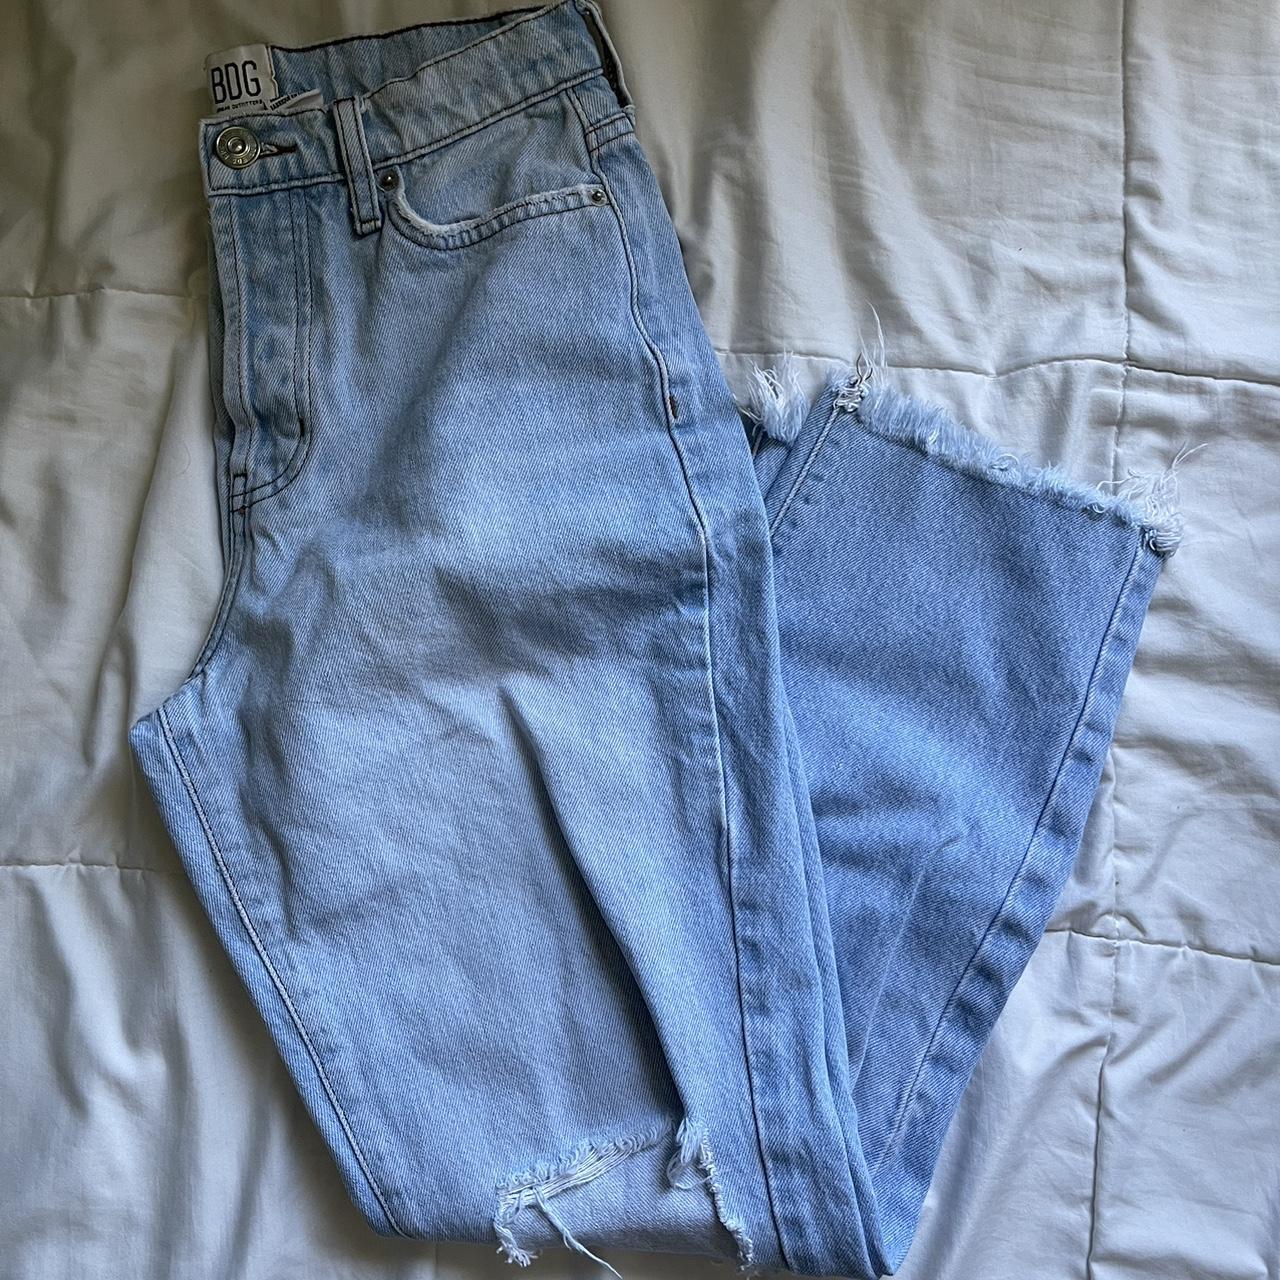 Urban outfitter BDG slim straight jeans size 26 - Depop